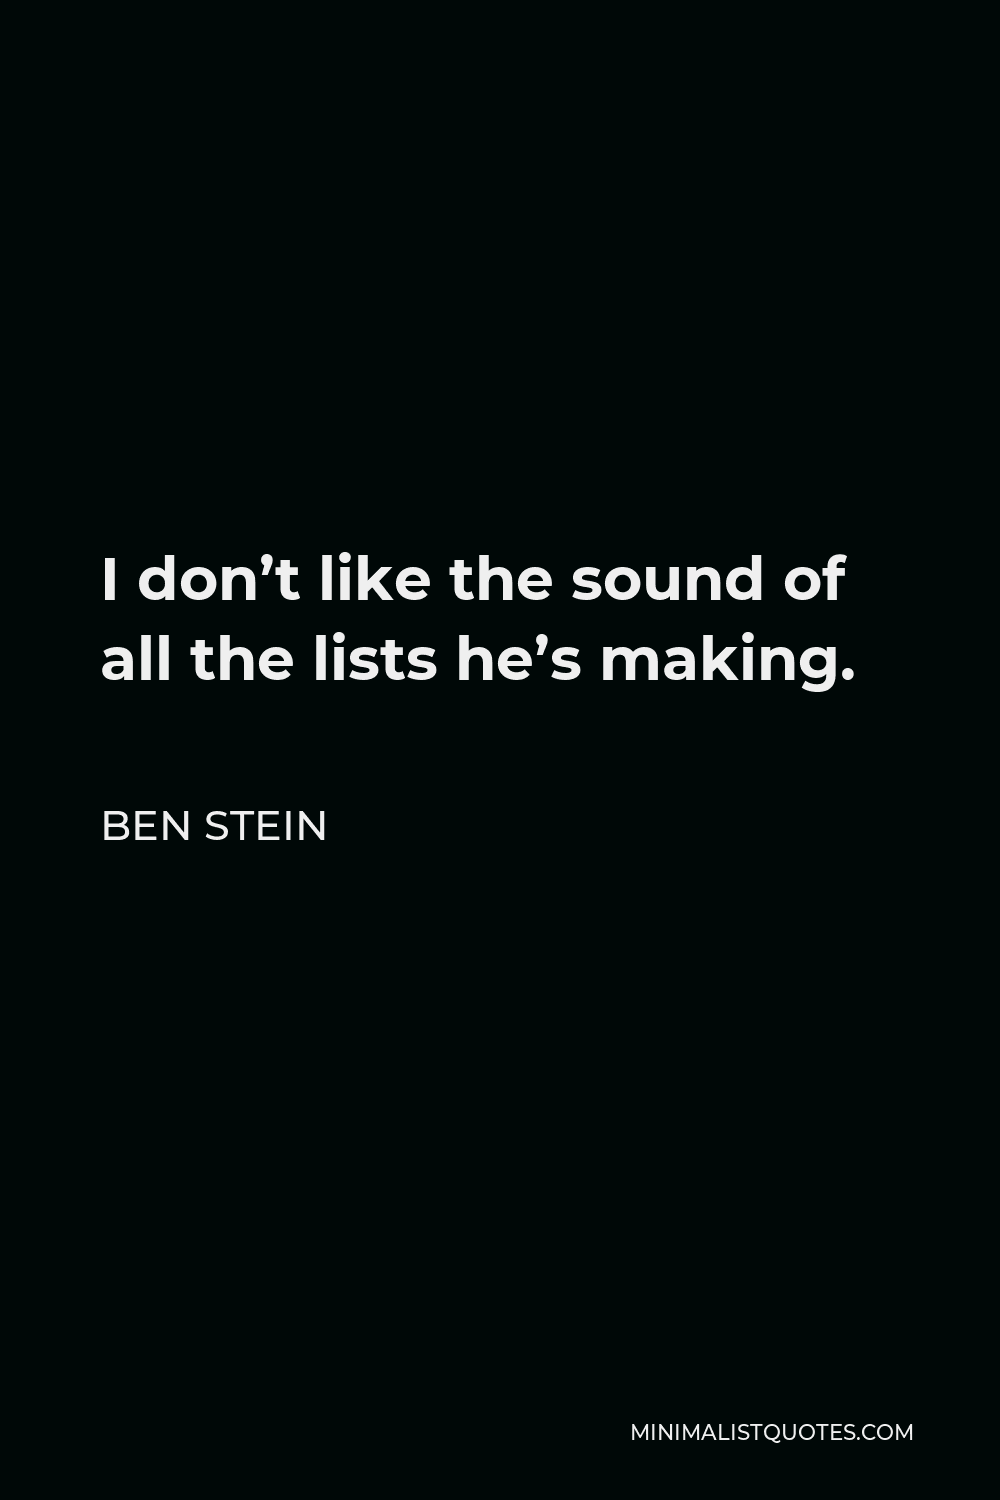 Ben Stein Quote - I don’t like the sound of all the lists he’s making.